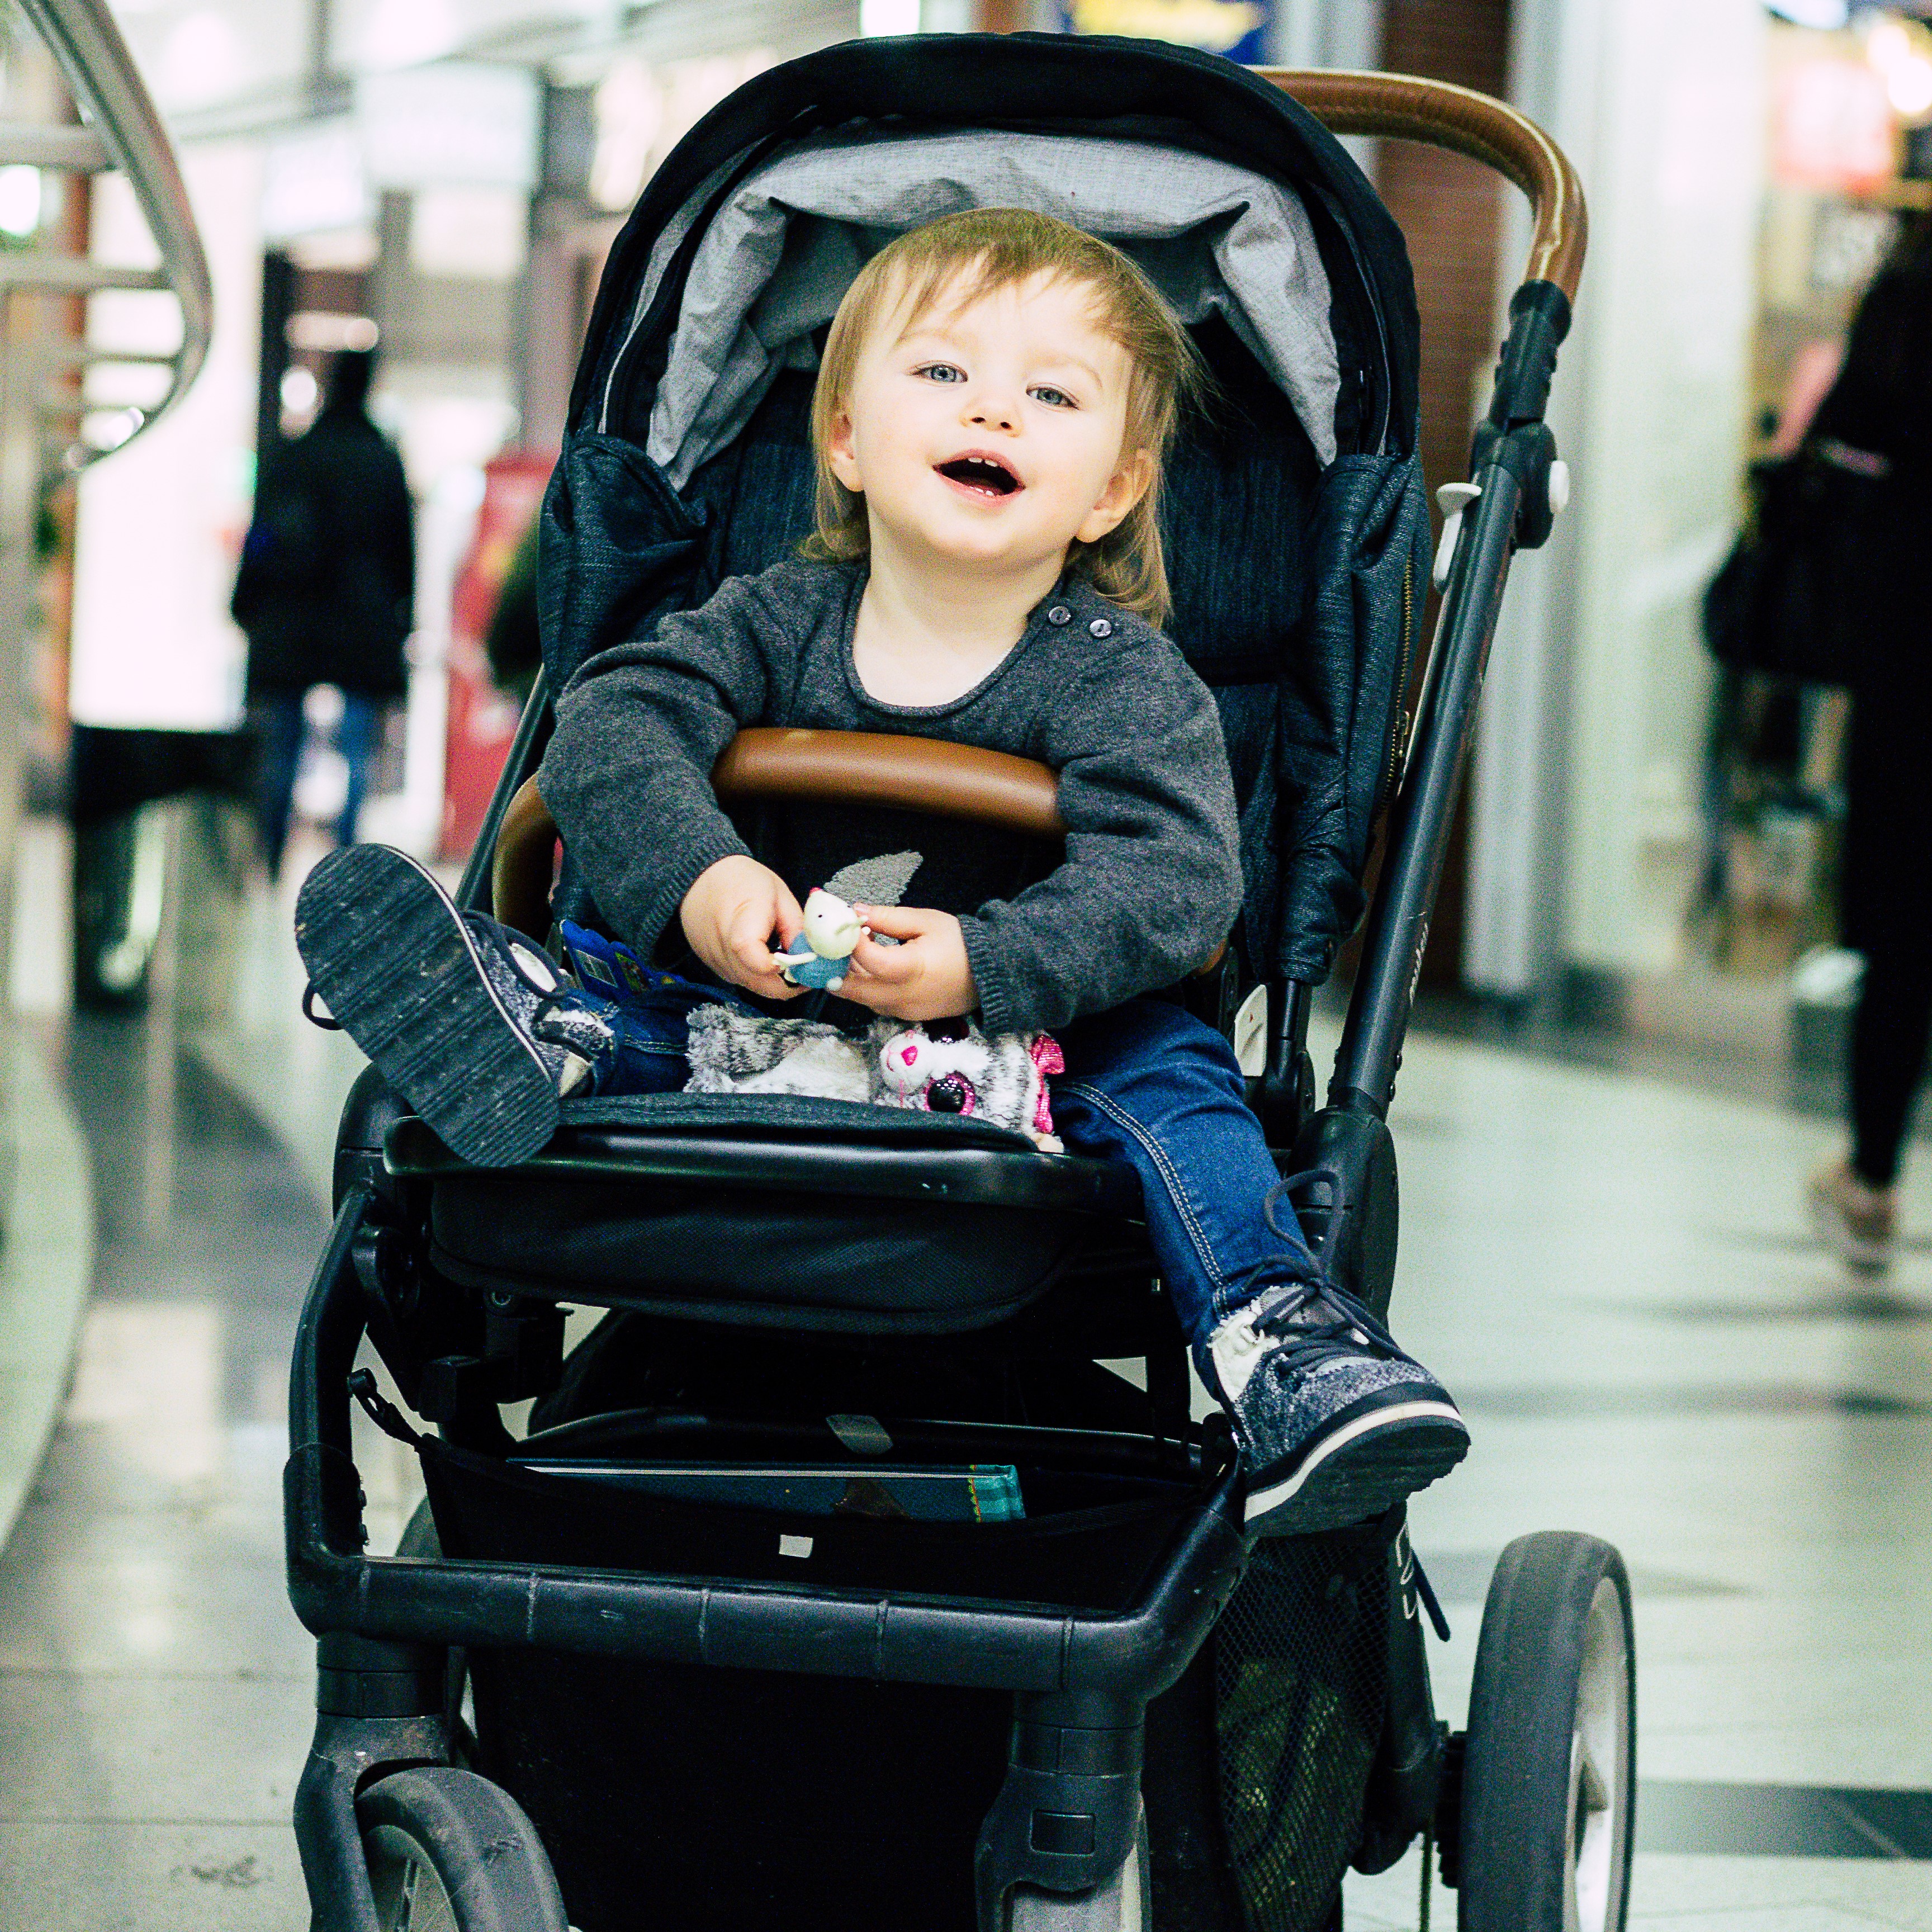 Free baby trolley and wheel chair rental service